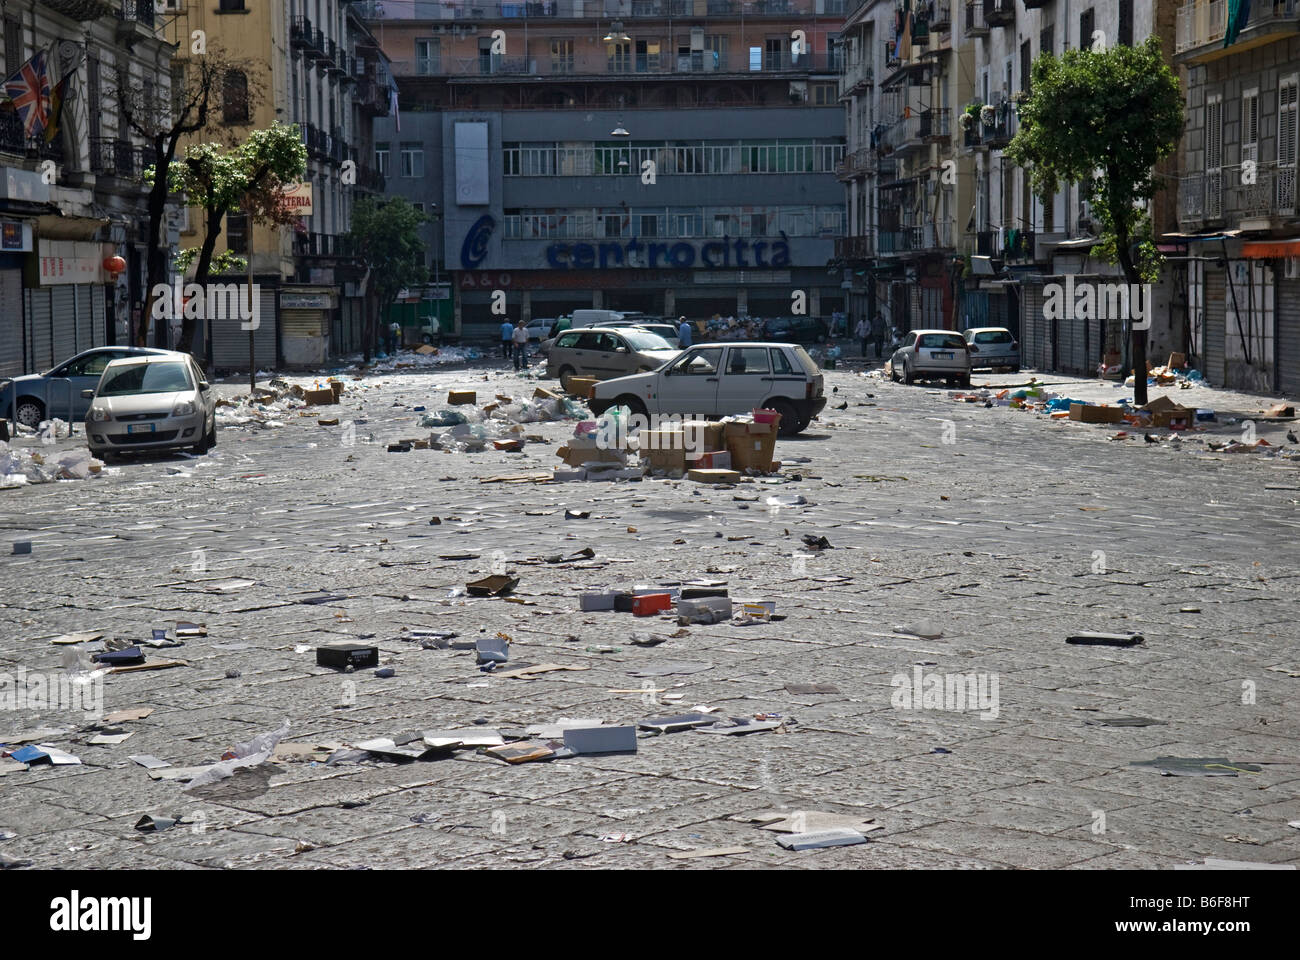 Garbage left behind after the market day in Naples, Calabria, Italy, Europe Stock Photo